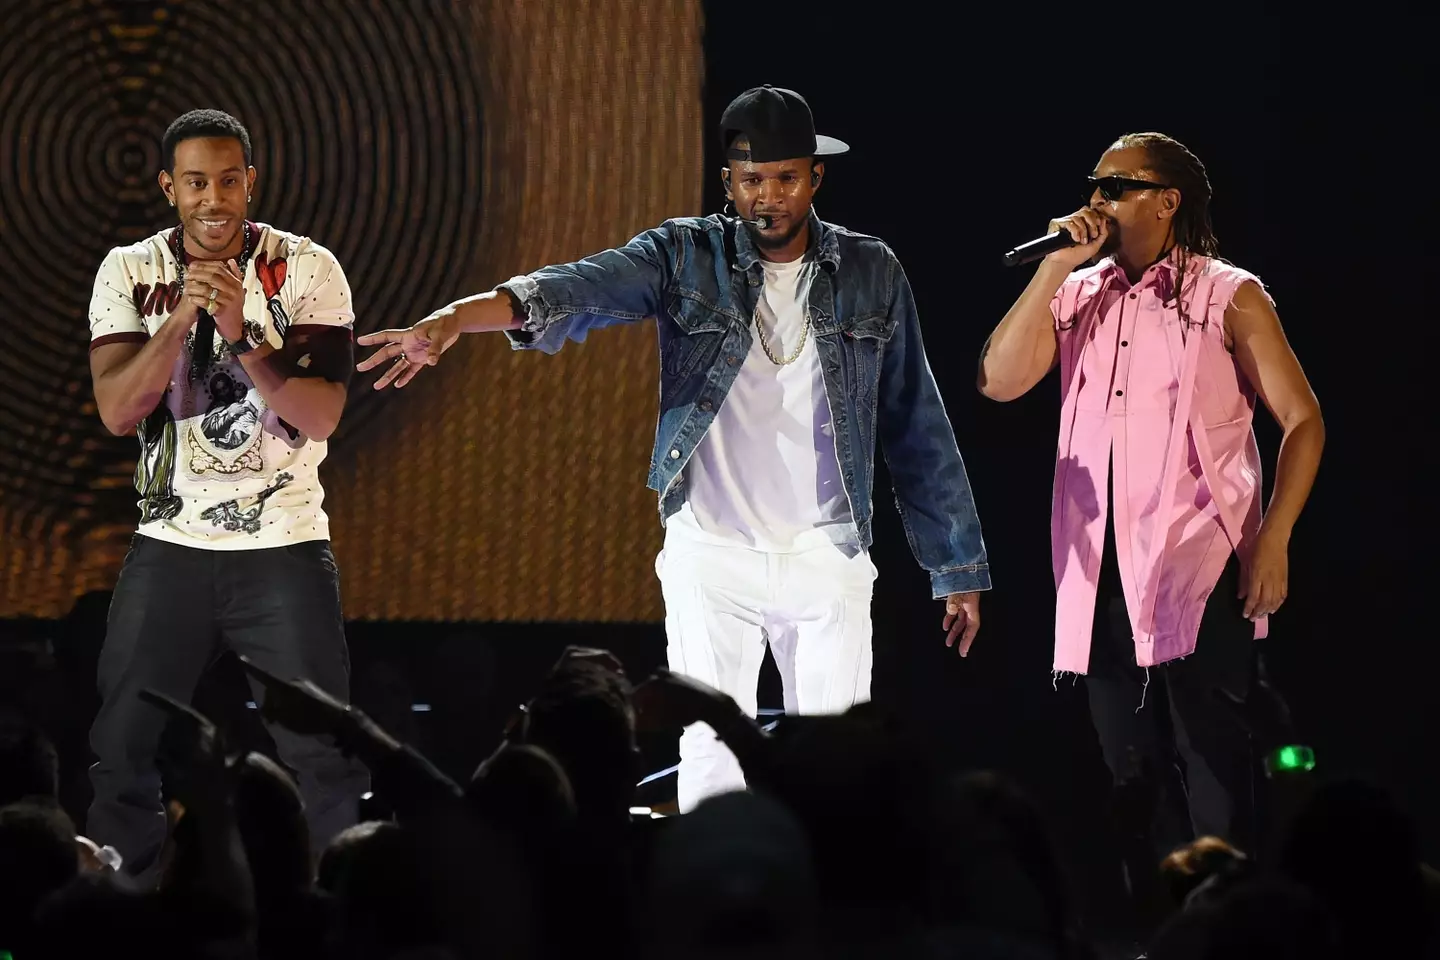 Usher, Lil Jon and Ludacris could be the ultimate combination.